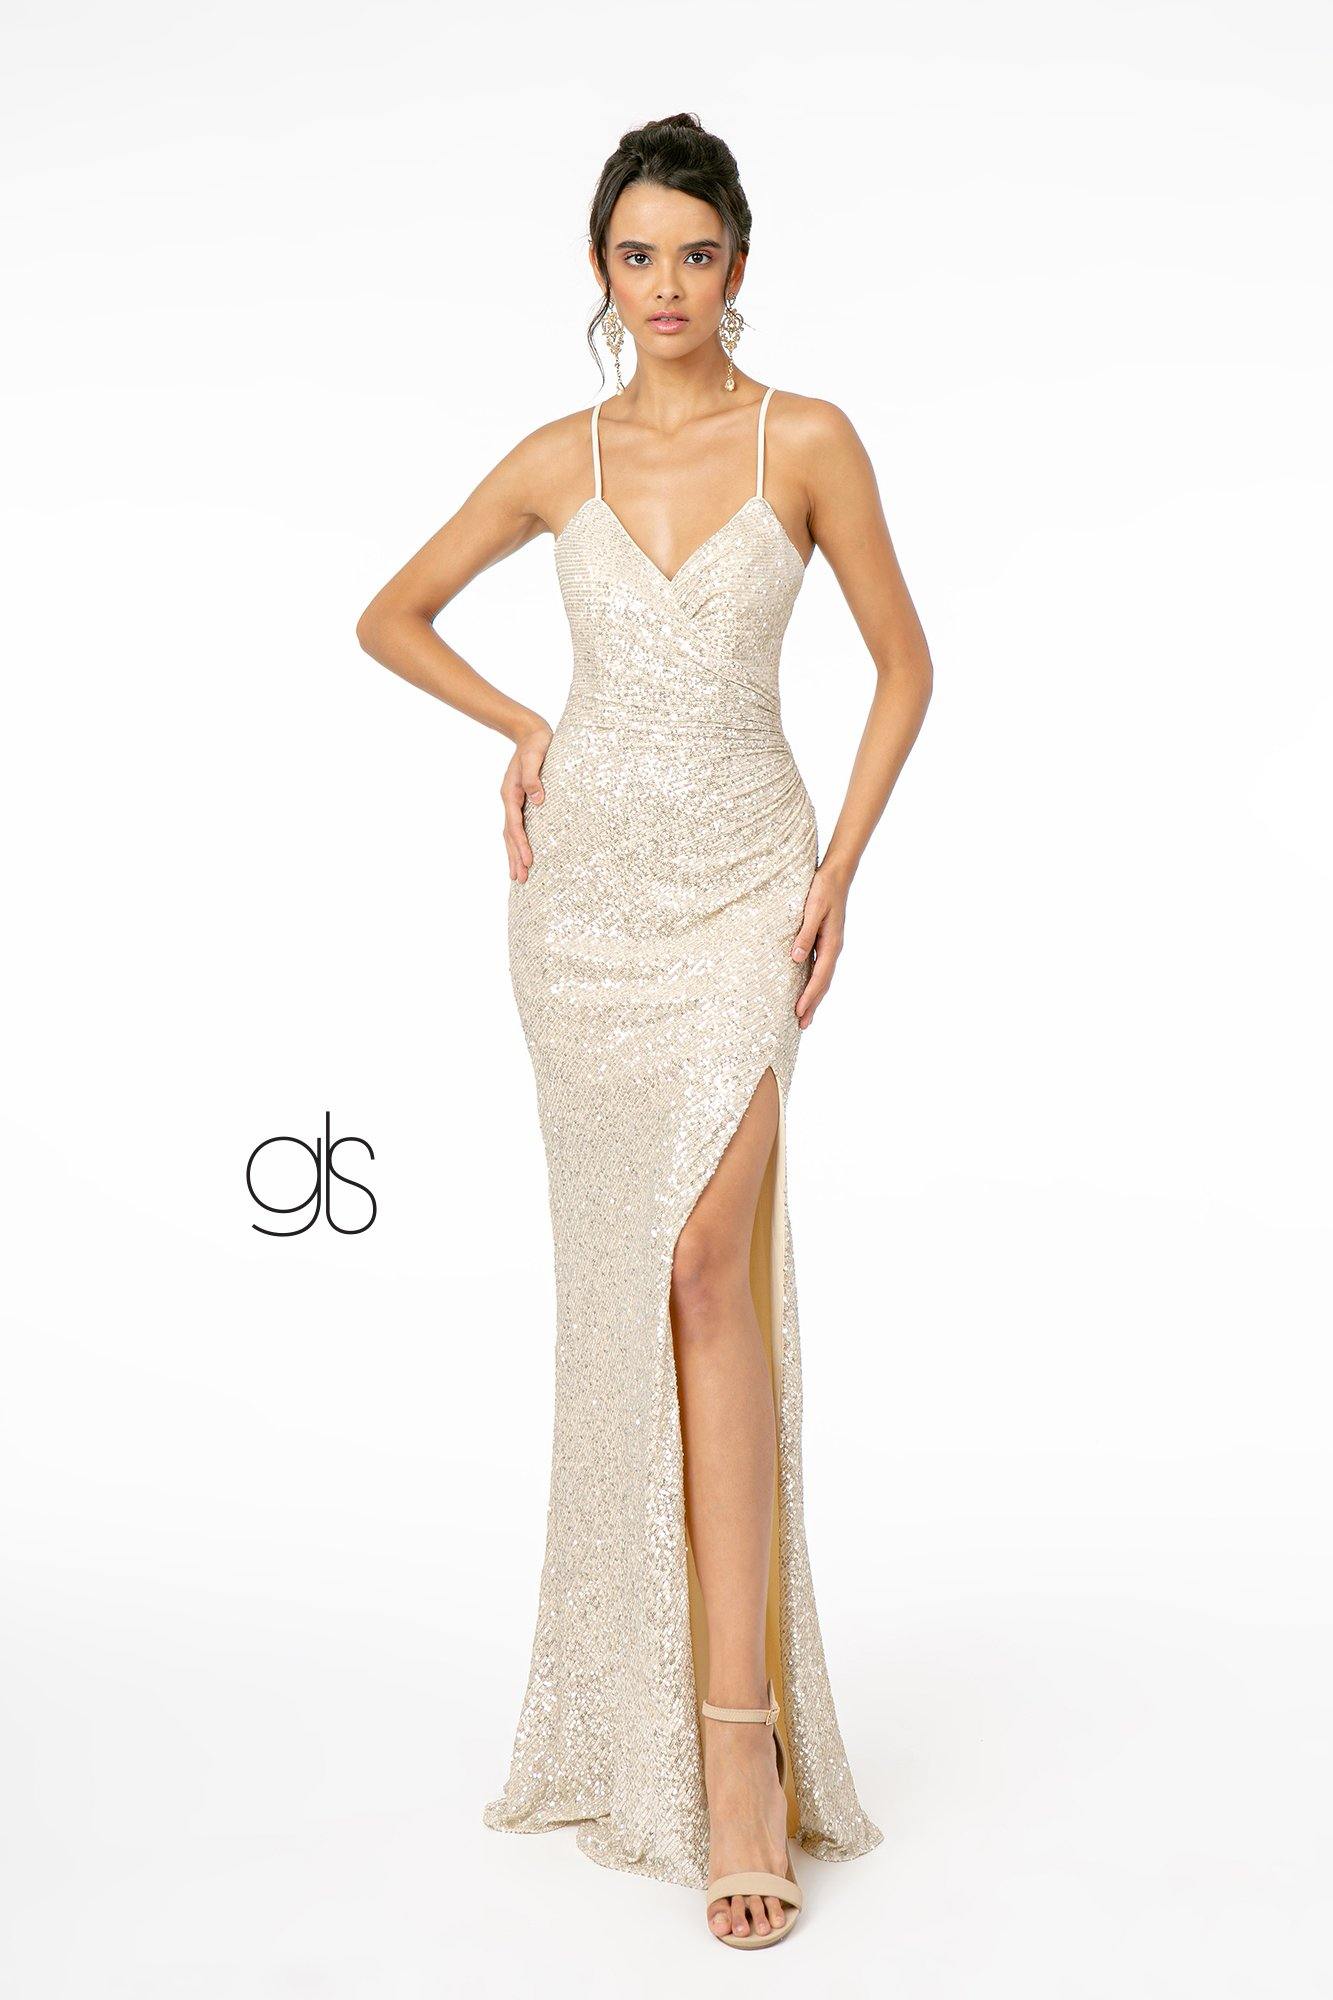 V-Neck Bodycon Sequin Long Prom Dress - The Dress Outlet